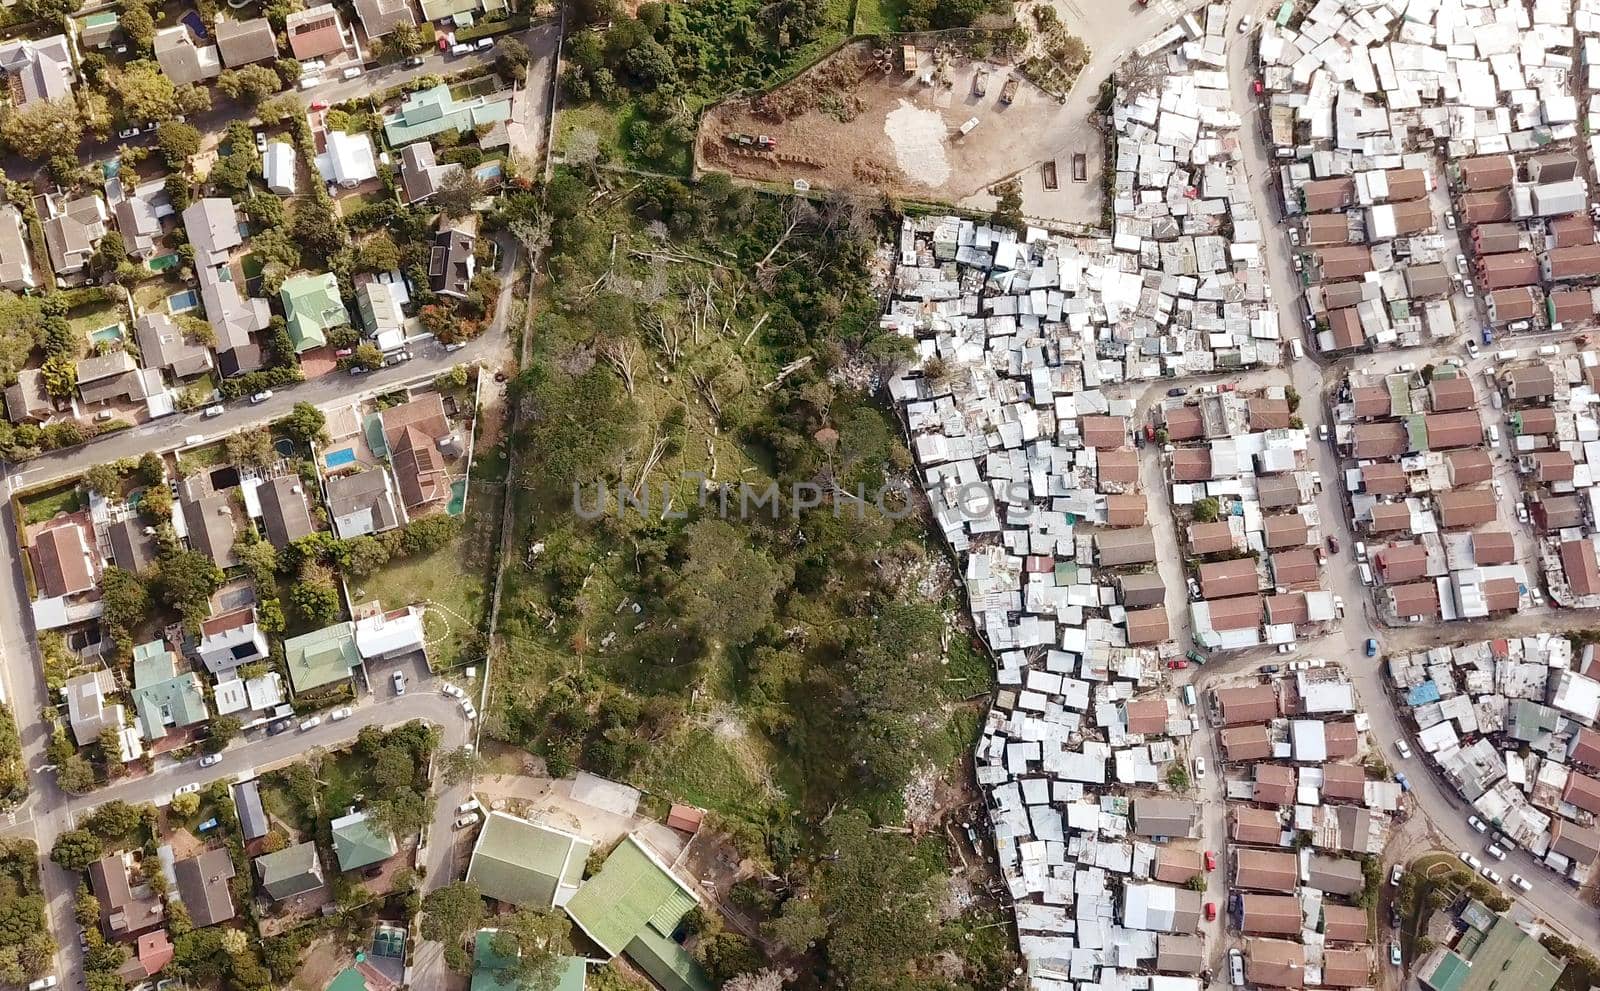 Aerial view over a township and wealthy suburb in South Africa by fivepointsix